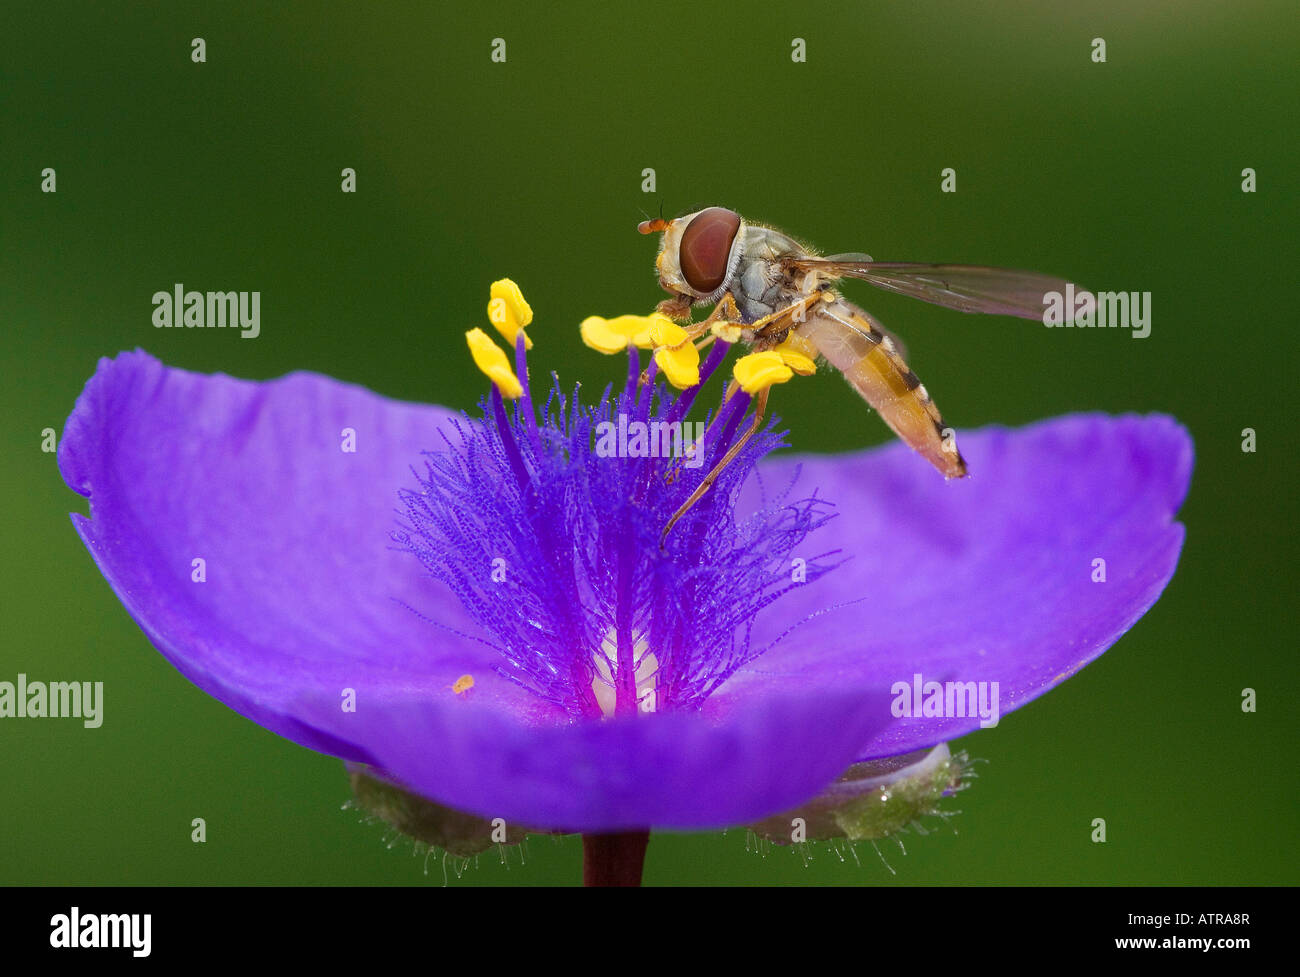 Marmalade Hover Fly Banque D'Images